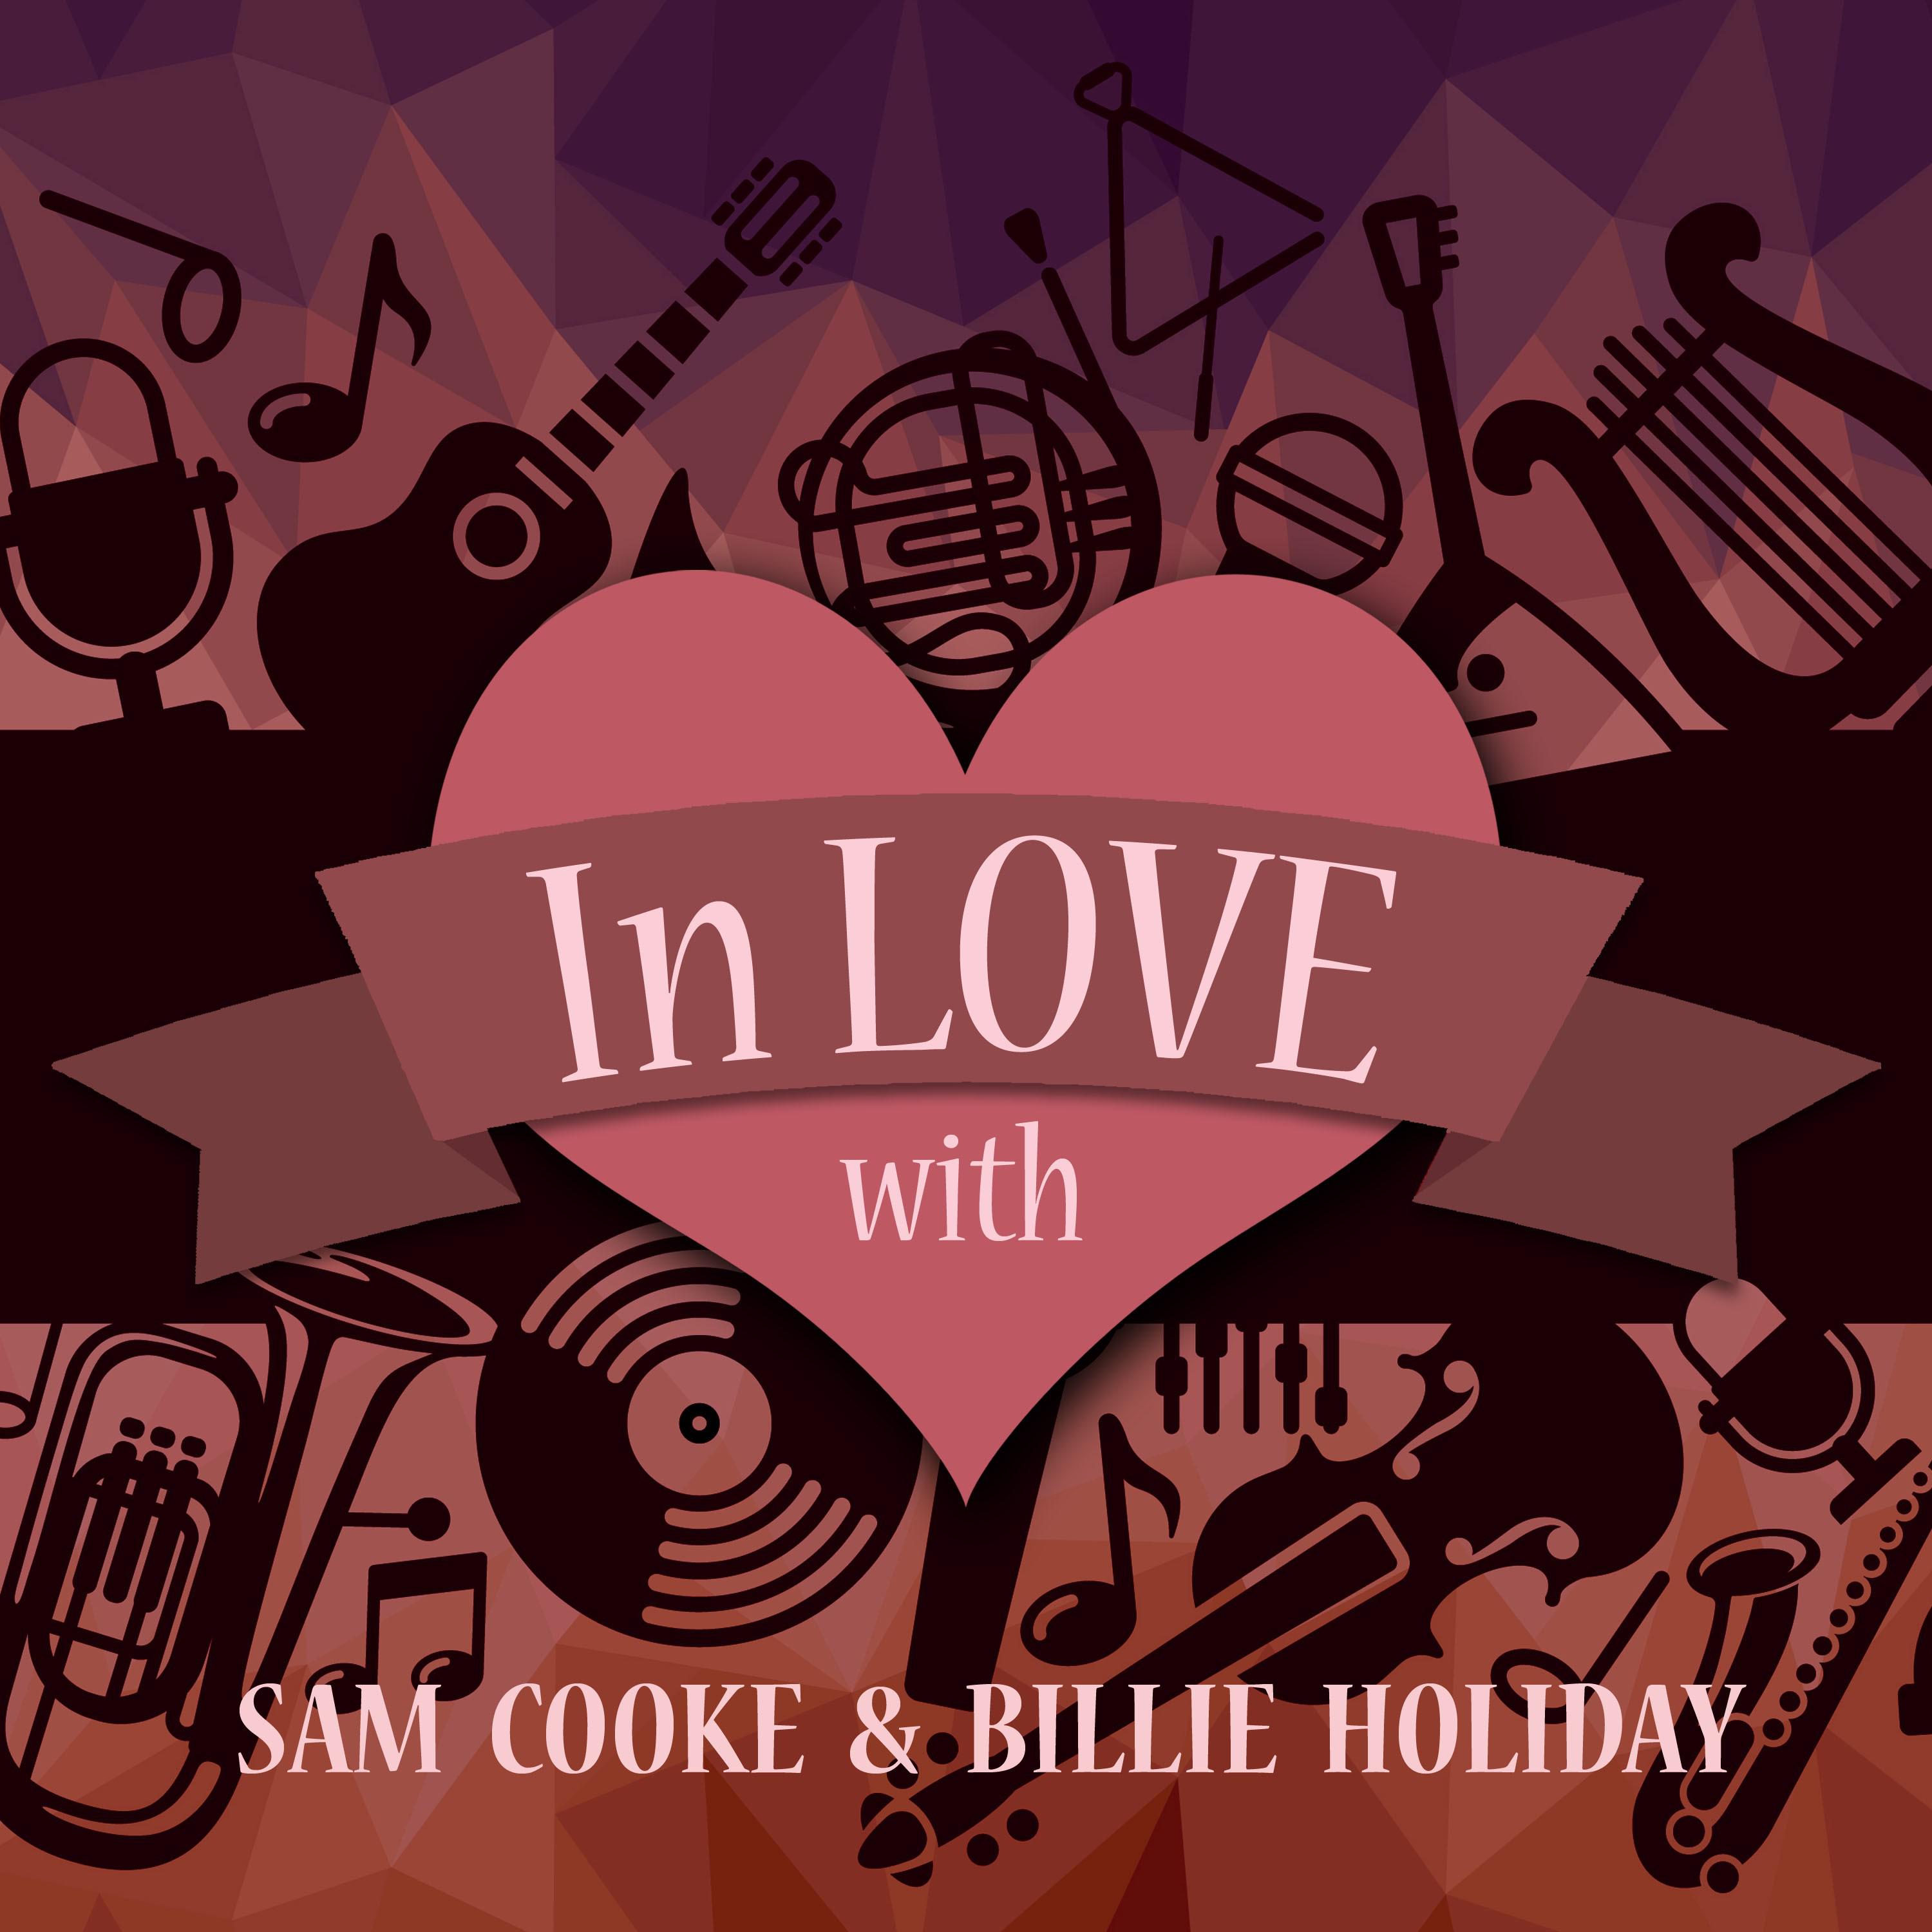 In Love with Sam Cooke & Billie Holiday